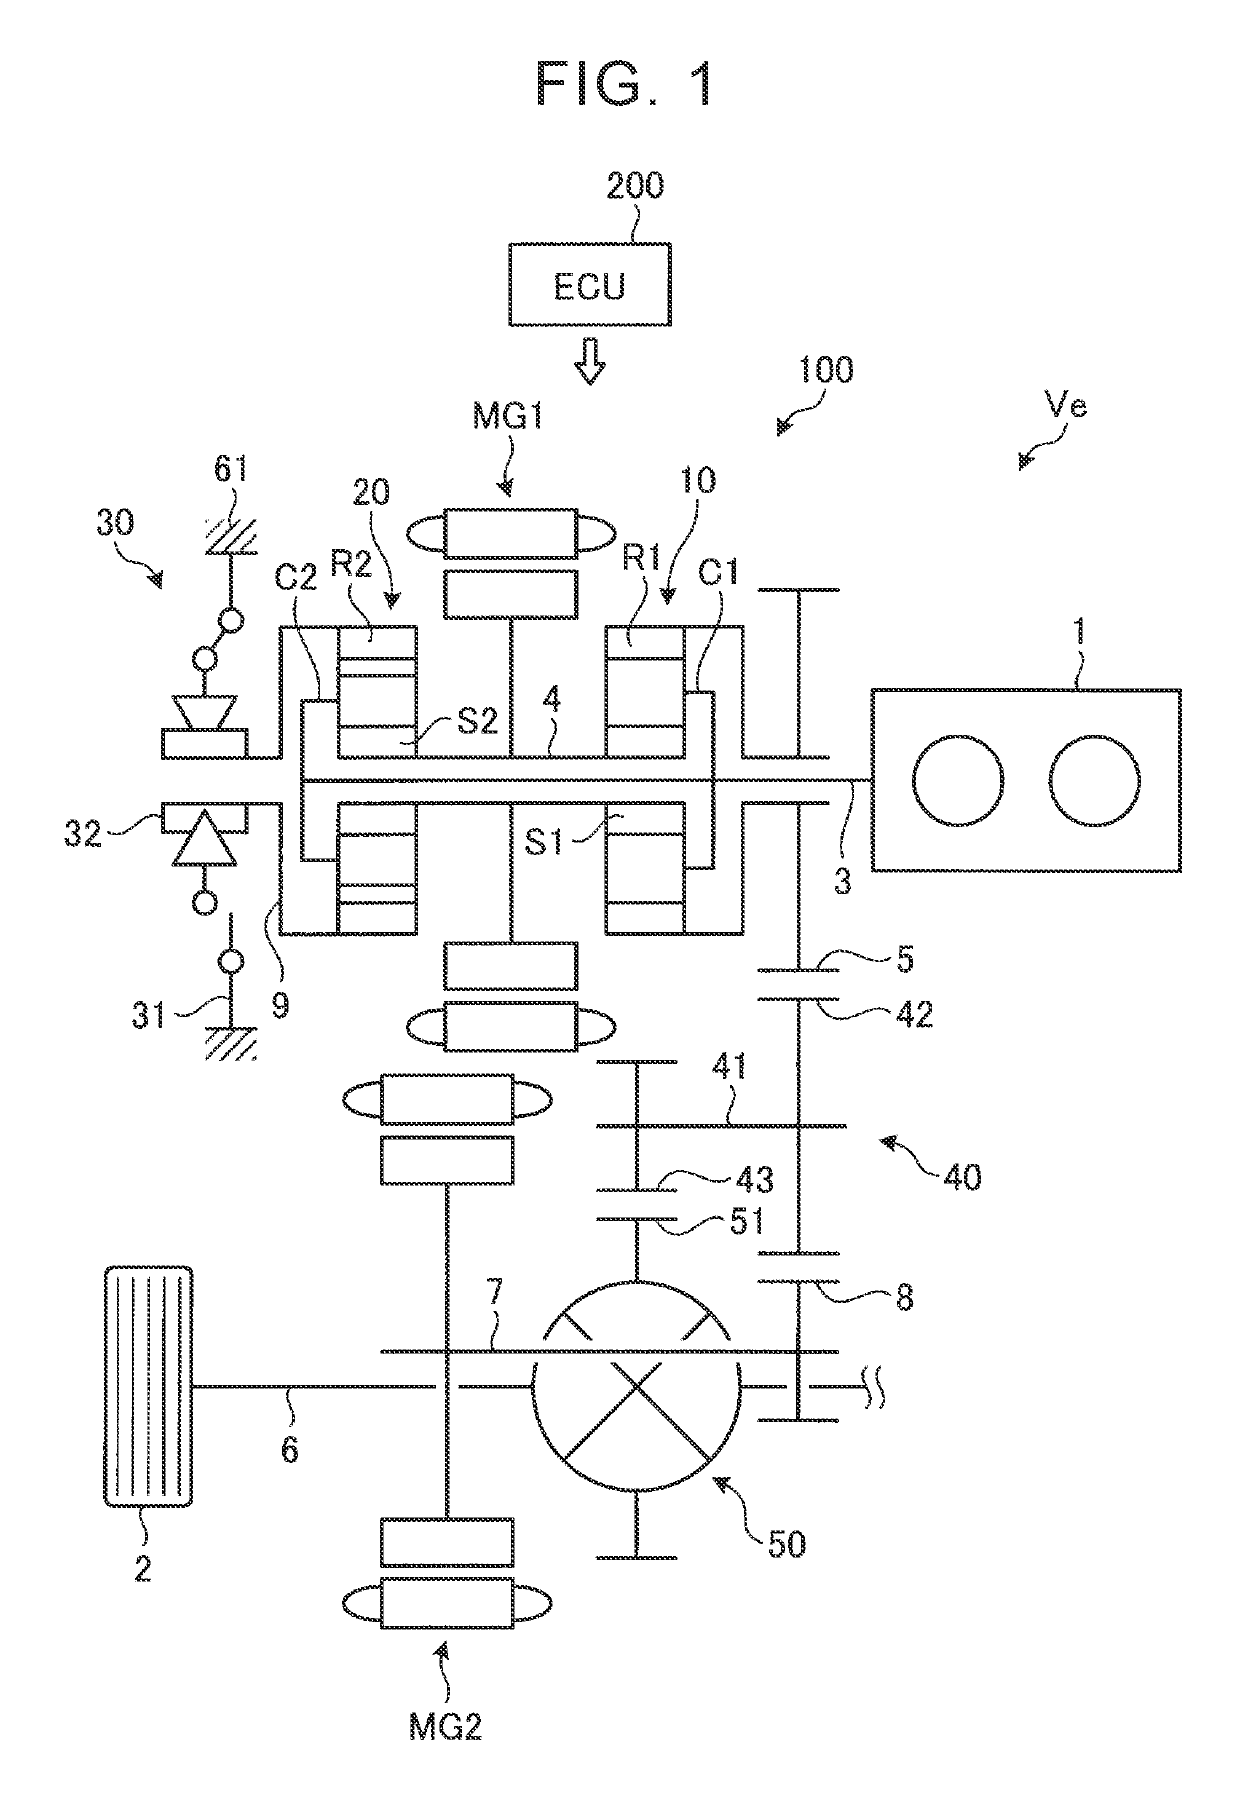 Controller for hybrid vehicle